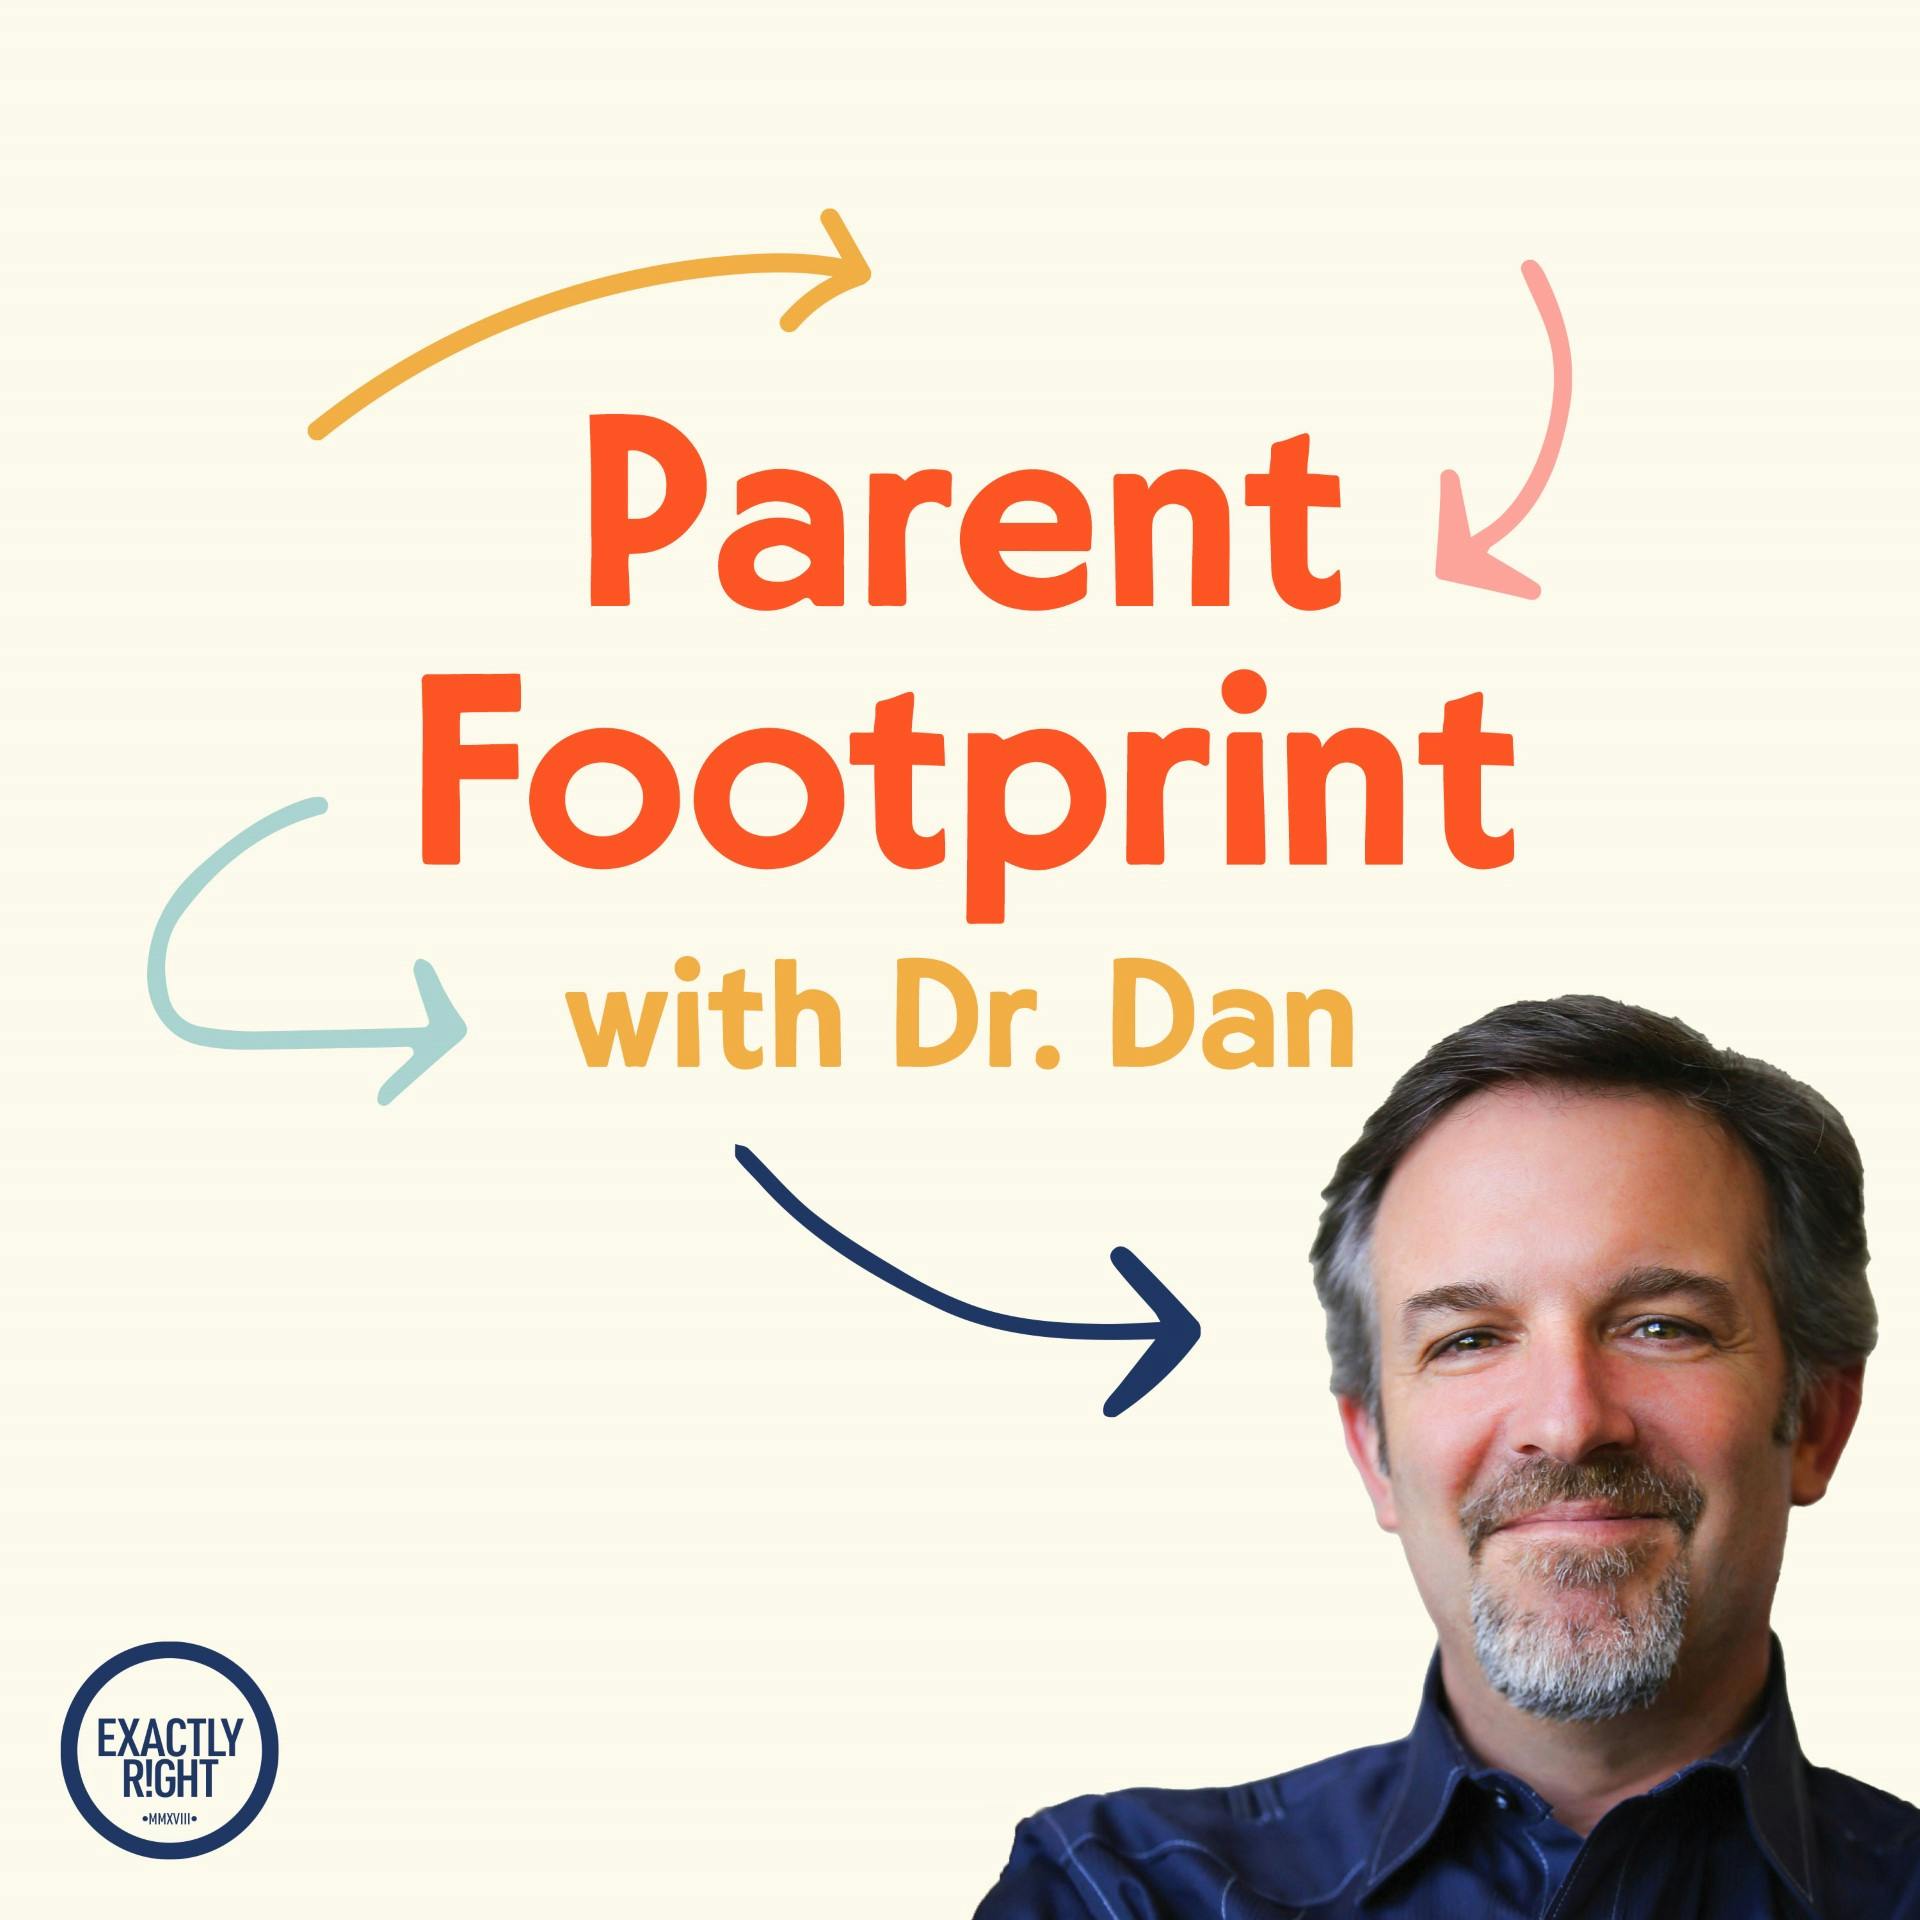 BONUS EPISODE #33: Sitting Down with Dr. Dan – Listener Questions about Nex Benedict and other parenting topics